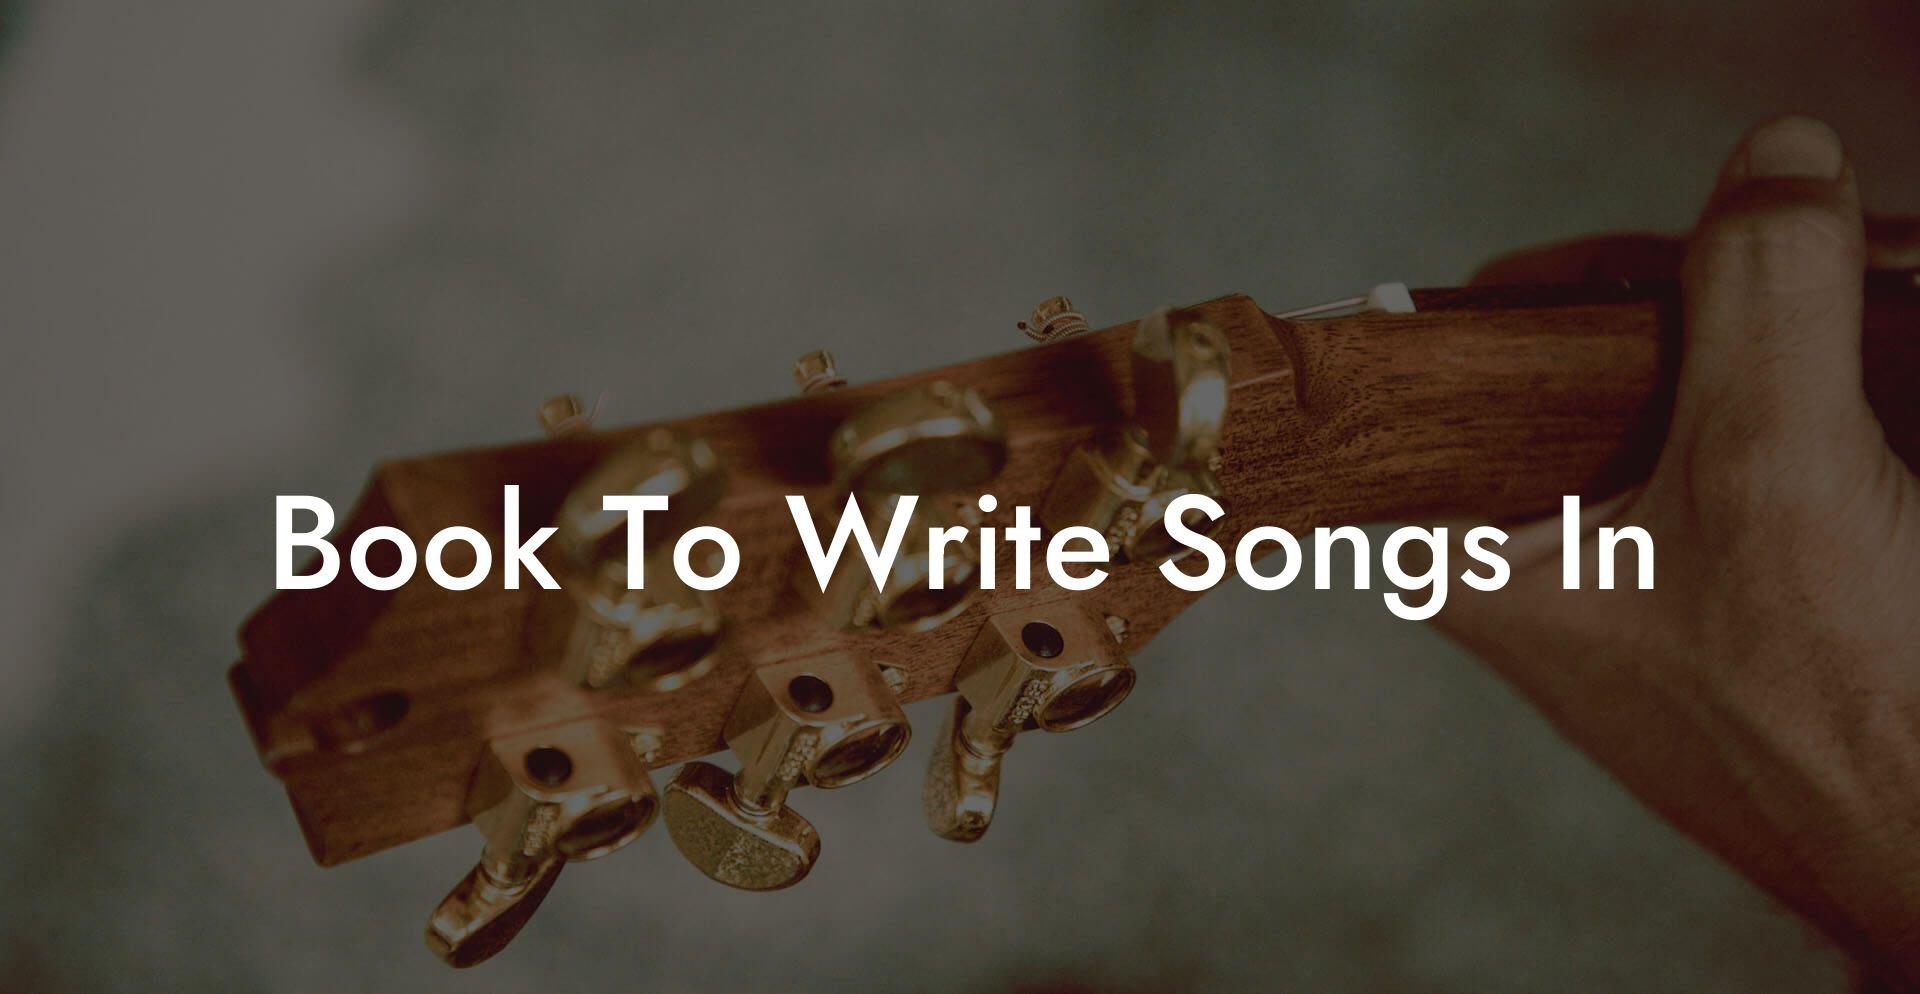 book to write songs in lyric assistant